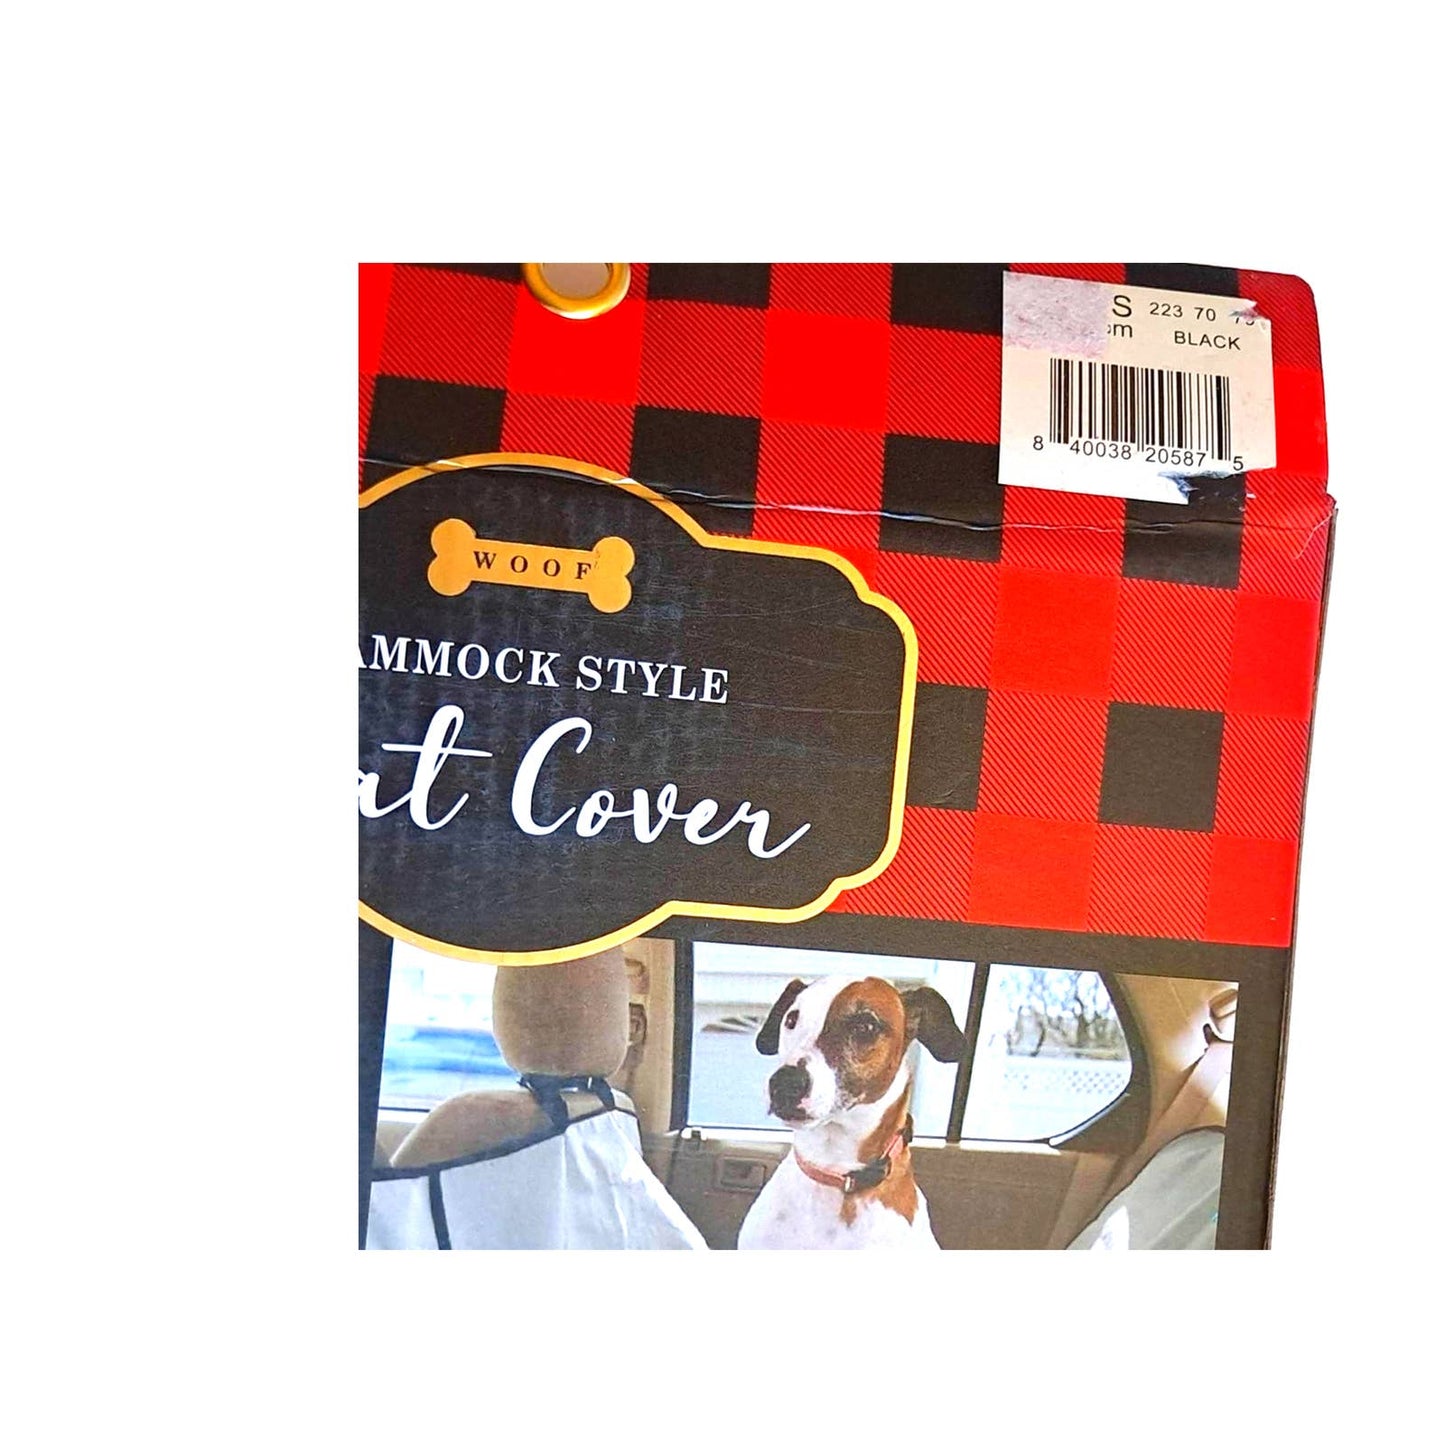 WOOF hammo k style doggie - pet seat cover NEW IN Box